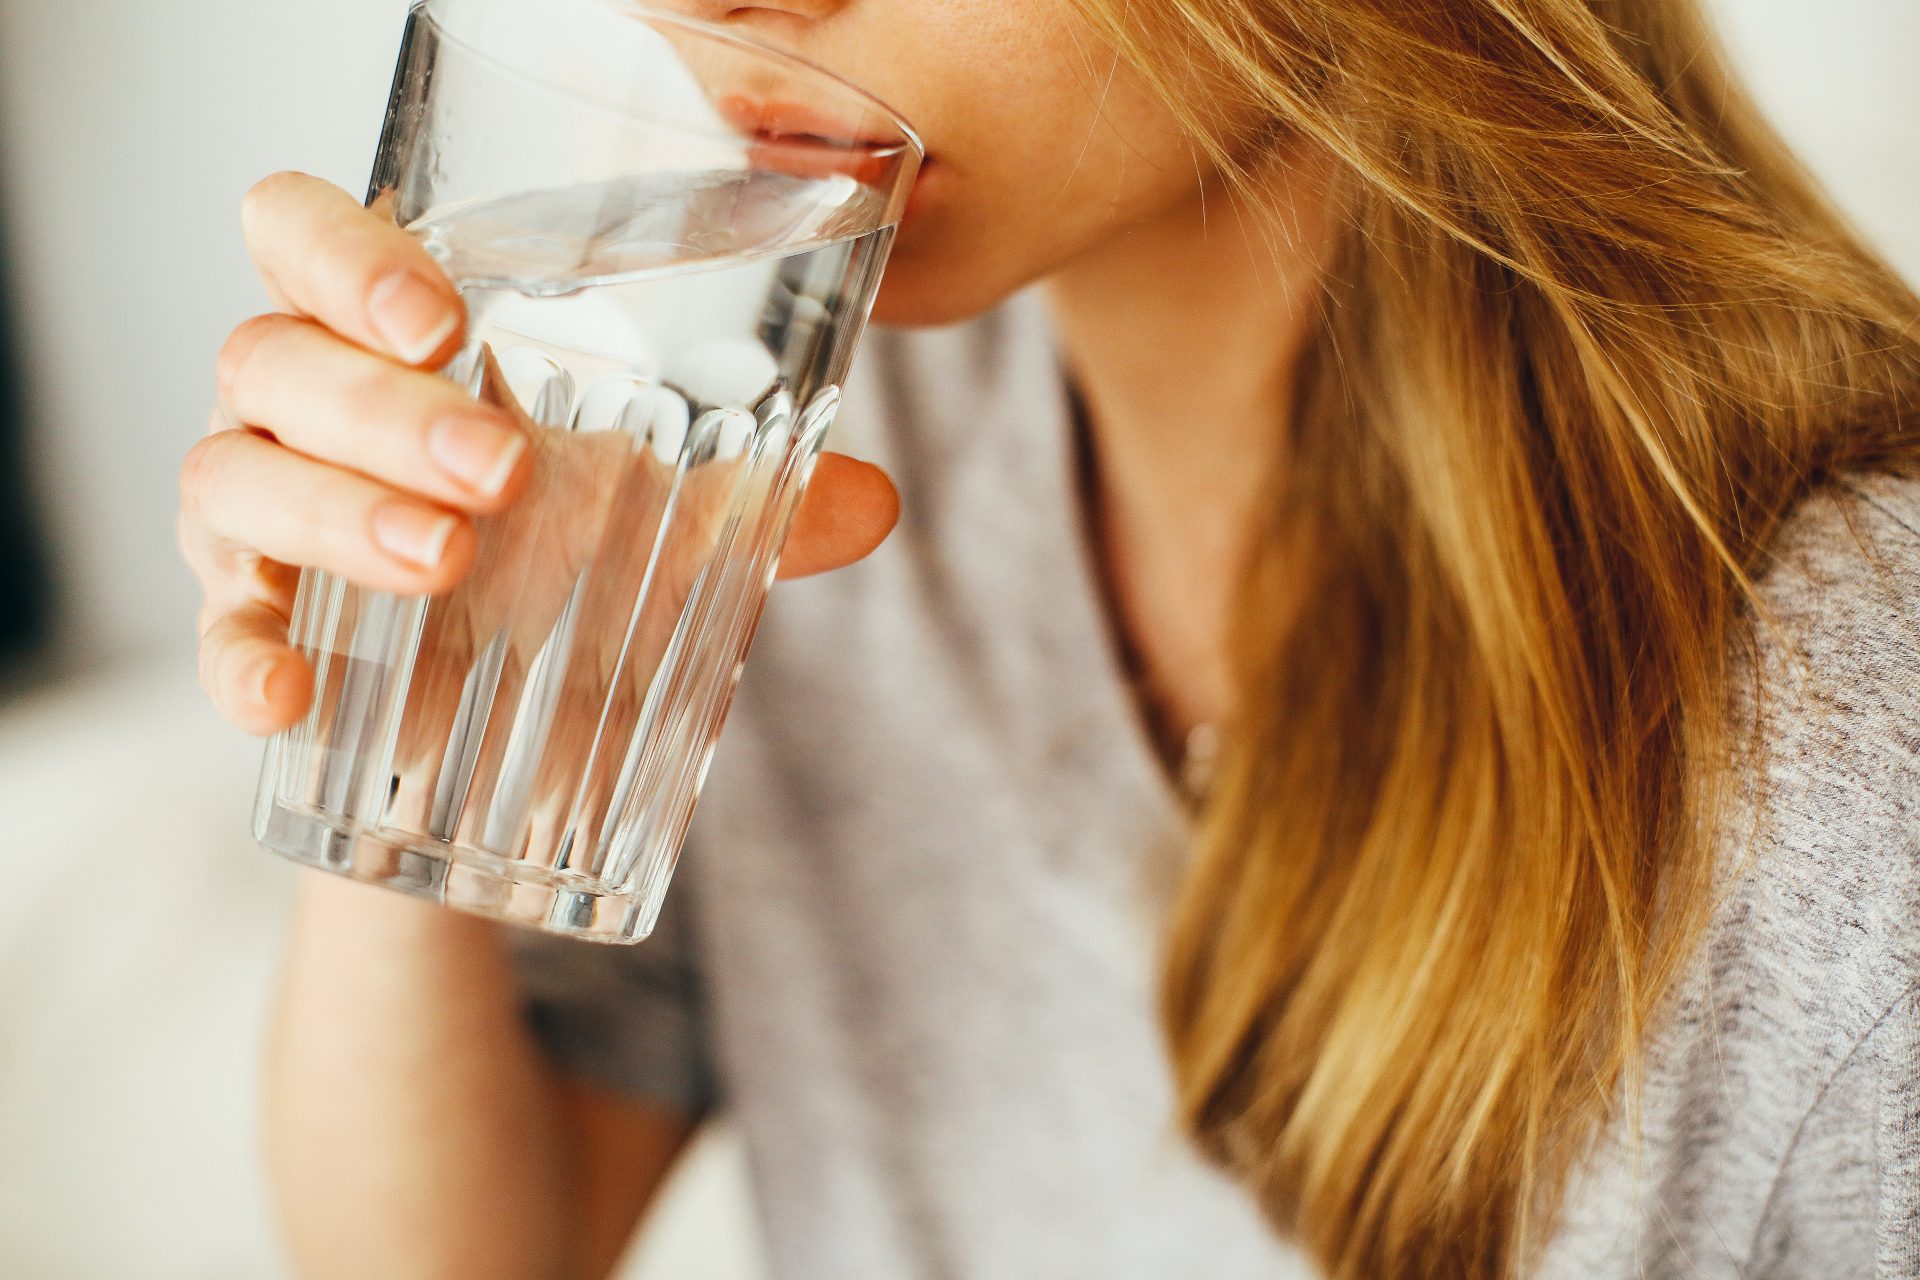 How to Drink More Water When You Dislike the Taste